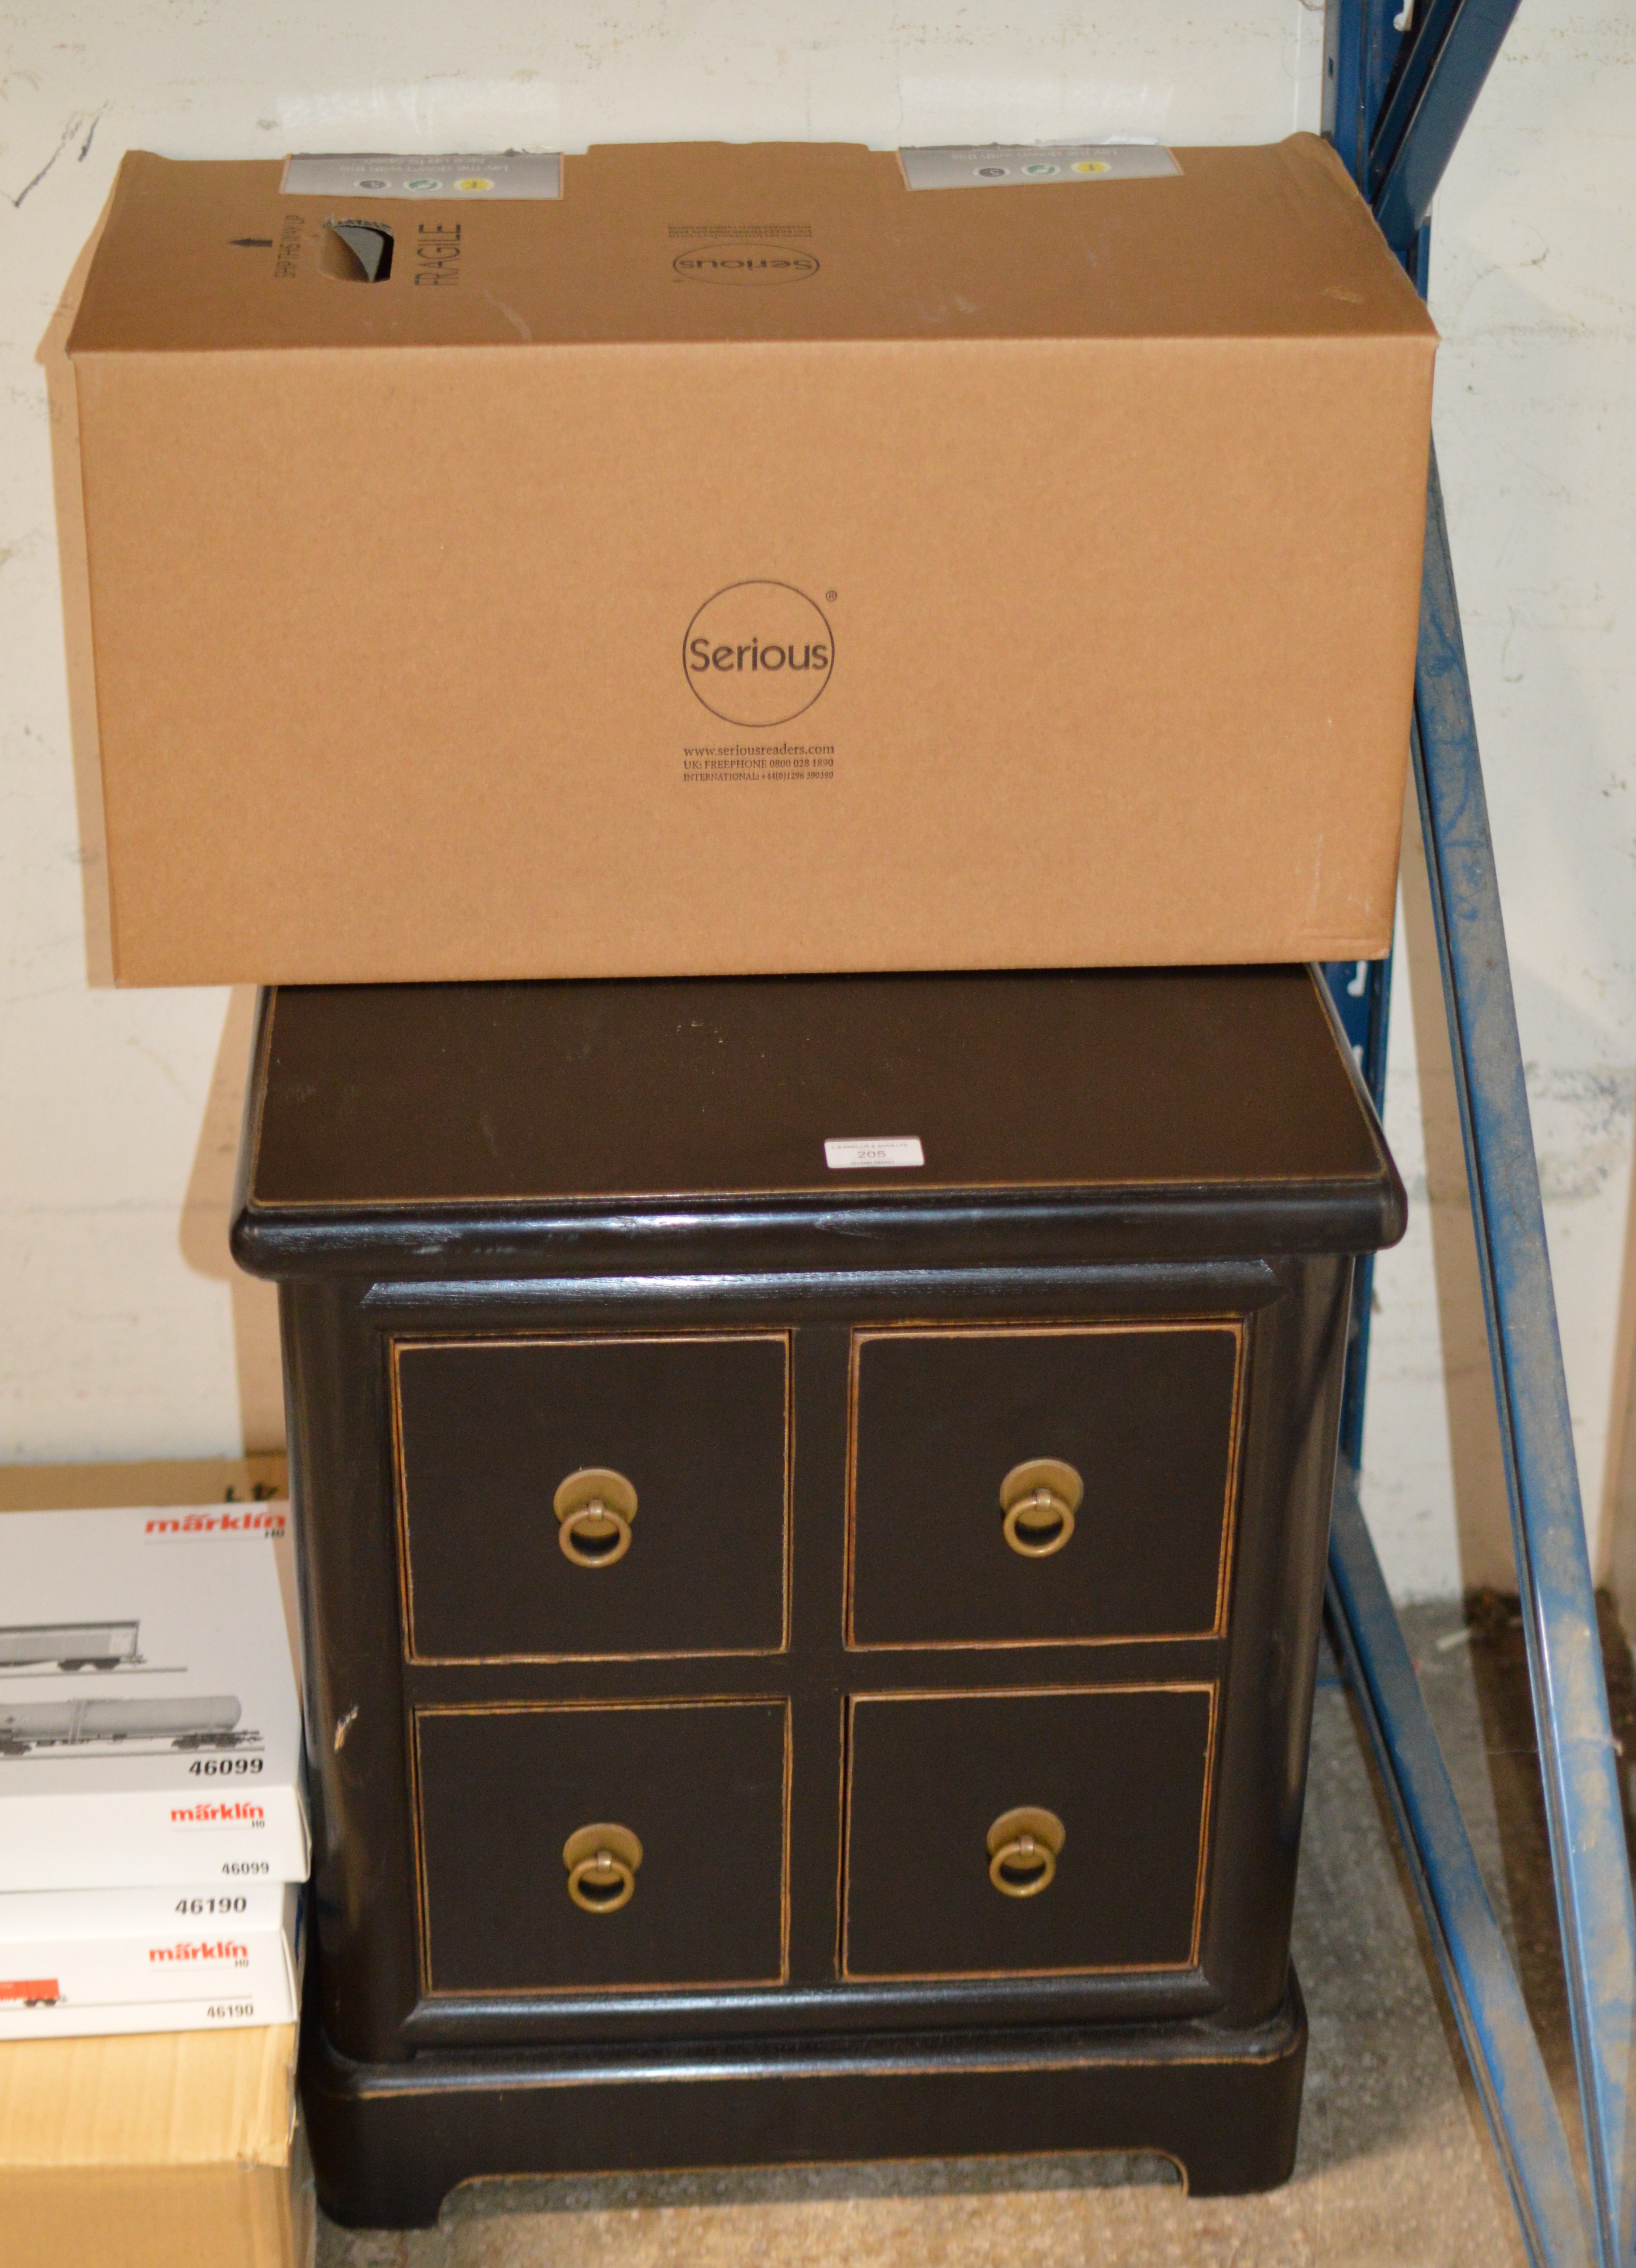 MODERN 4 DRAWER UNIT & TABLE LAMP IN BOX